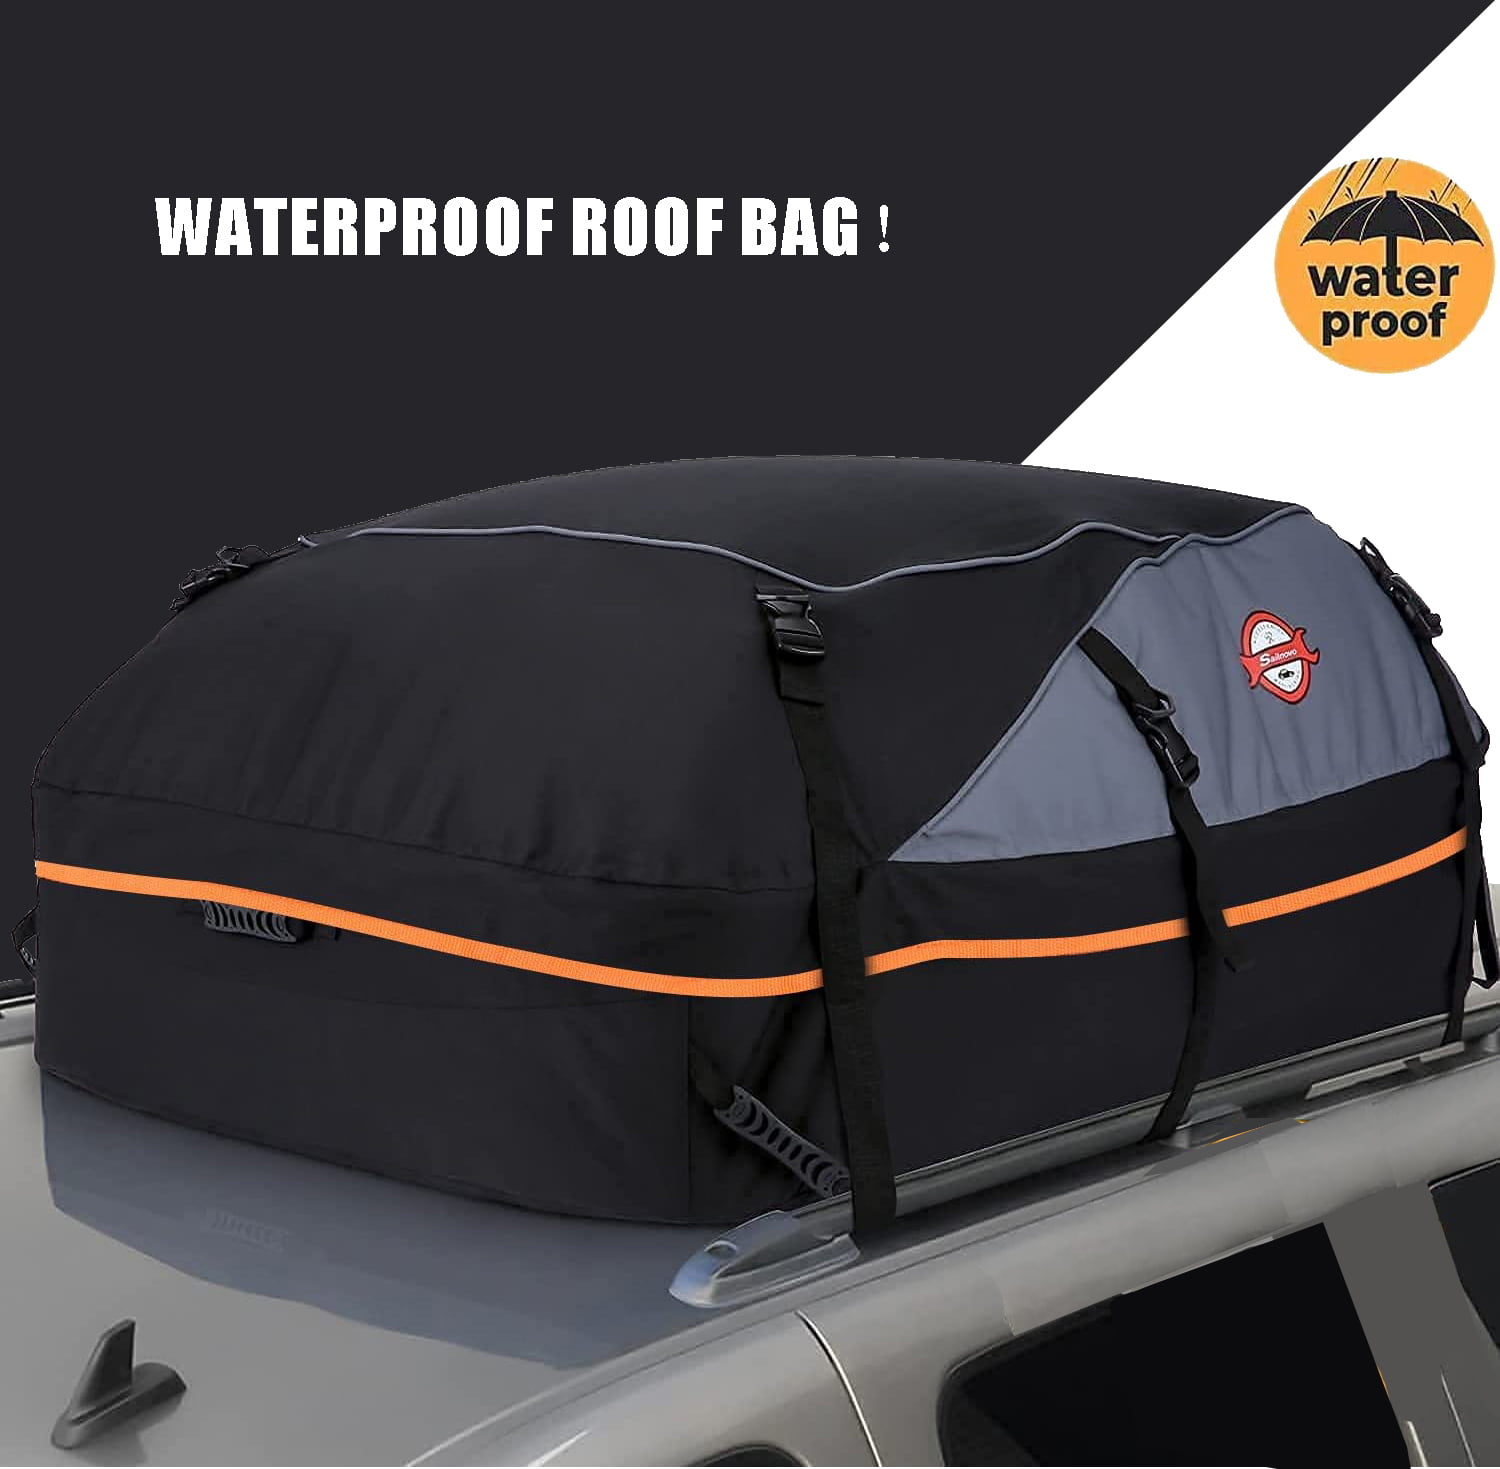 15 Cubic Feet MIDABAO Car Roof Bag Top Carrier Cargo Storage Rooftop Luggage Waterproof PVC Soft Box Luggage Outdoor Water Resistant for Car with Racks,Travel Touring,Cars,Vans, 